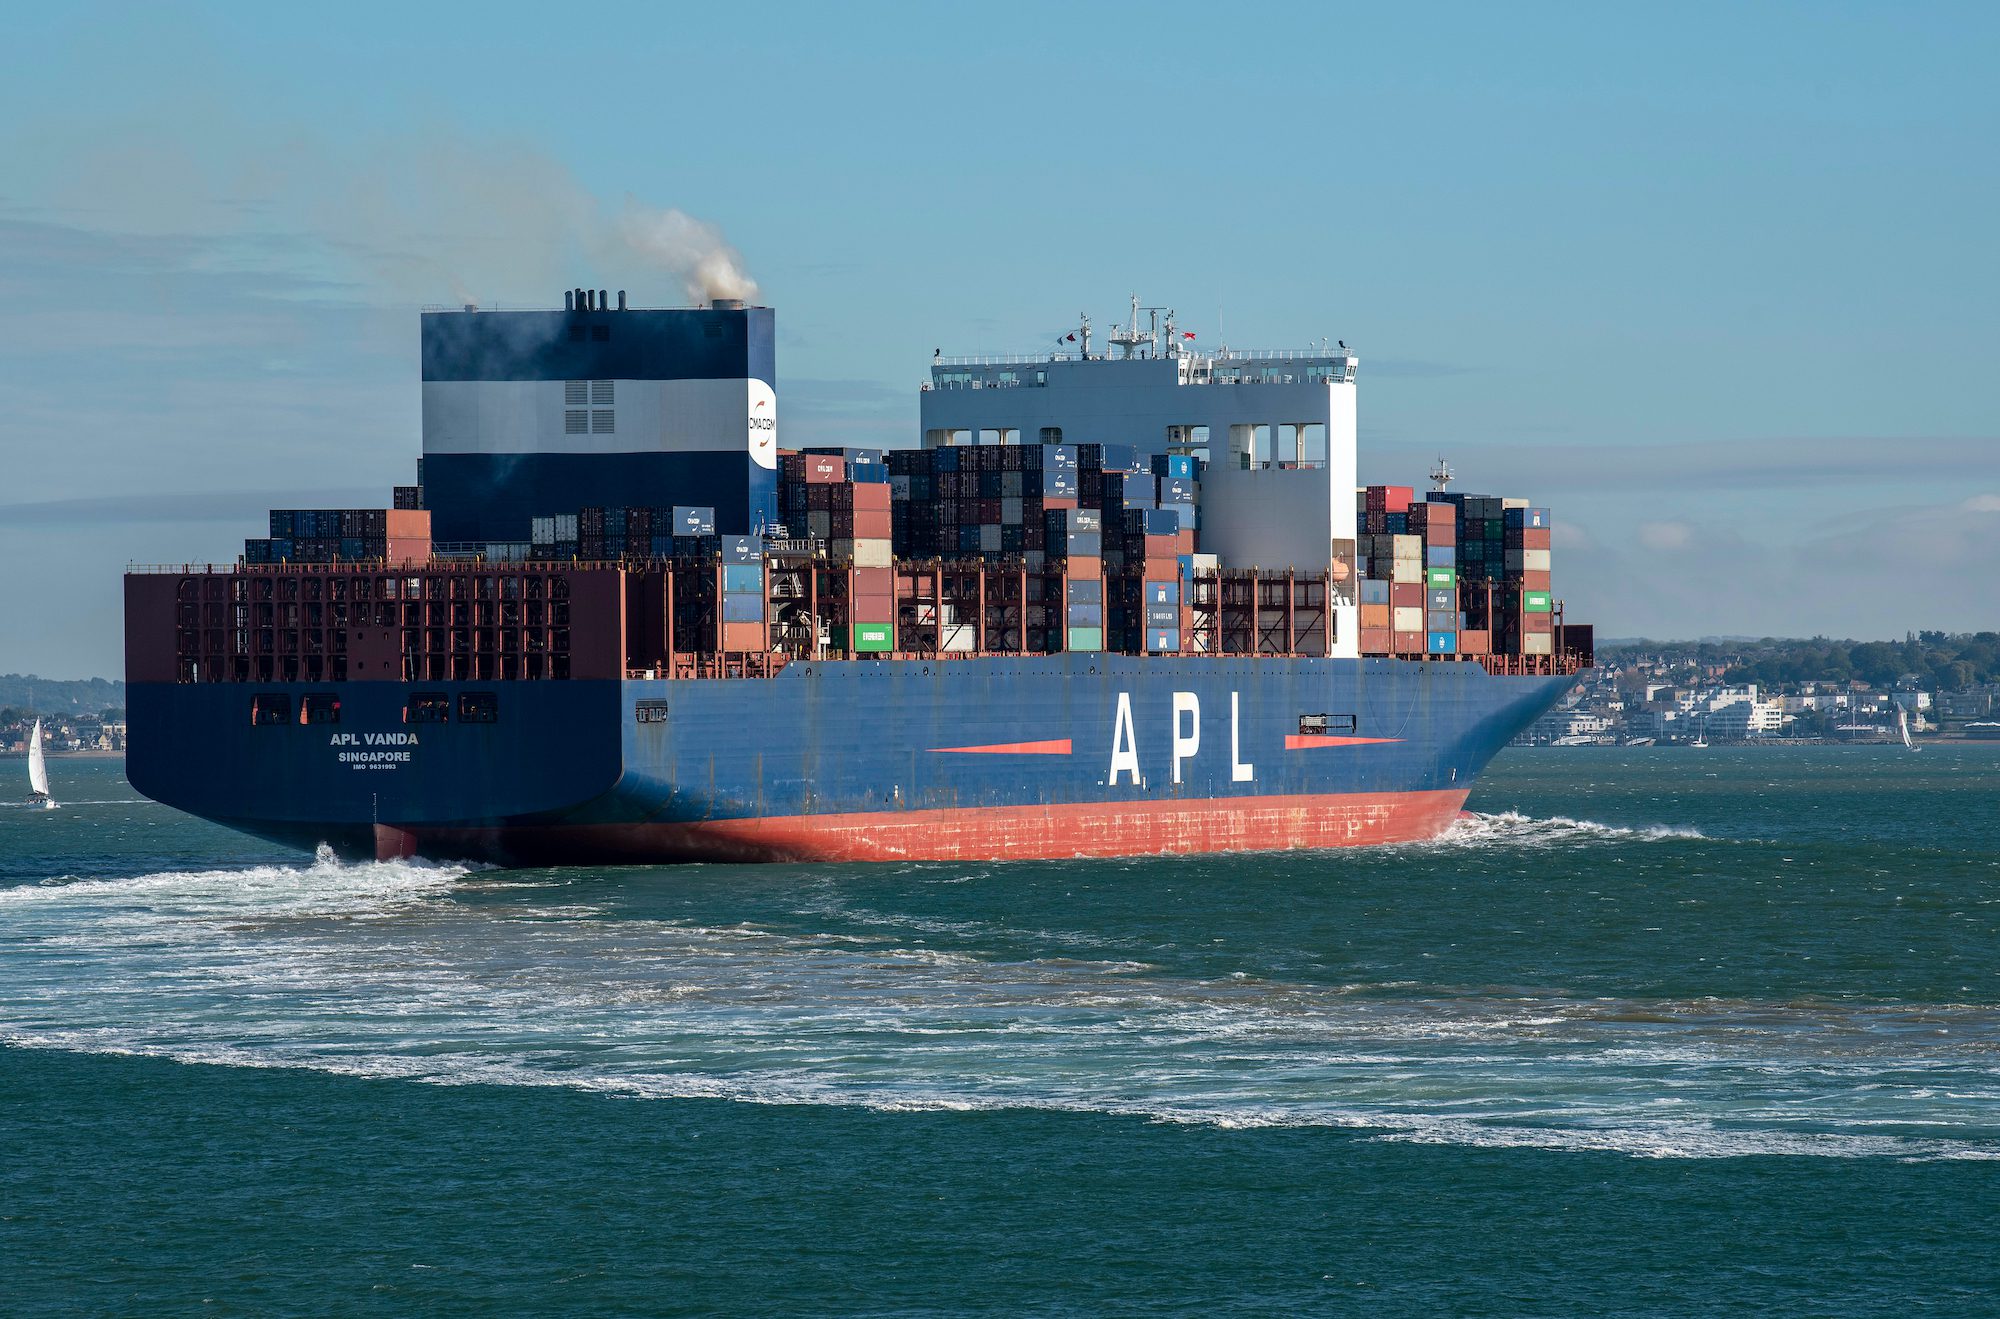 Ultra-Large Containership APL Vanda Loses Boxes Overboard in Indian Ocean